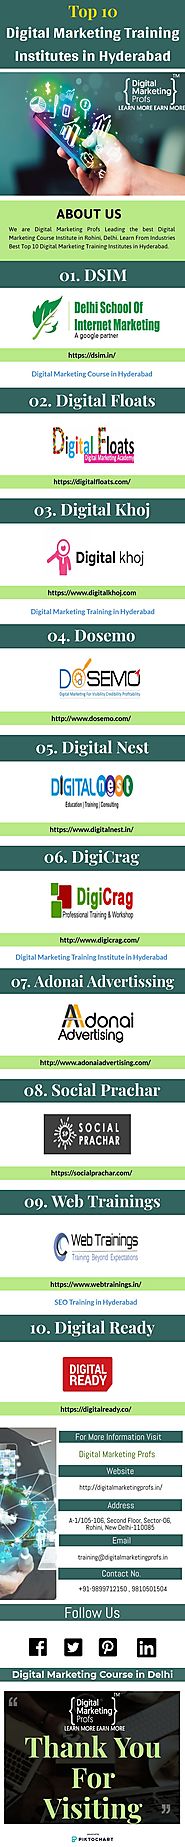 Digital Marketing Course in Hyderabad - Infographic